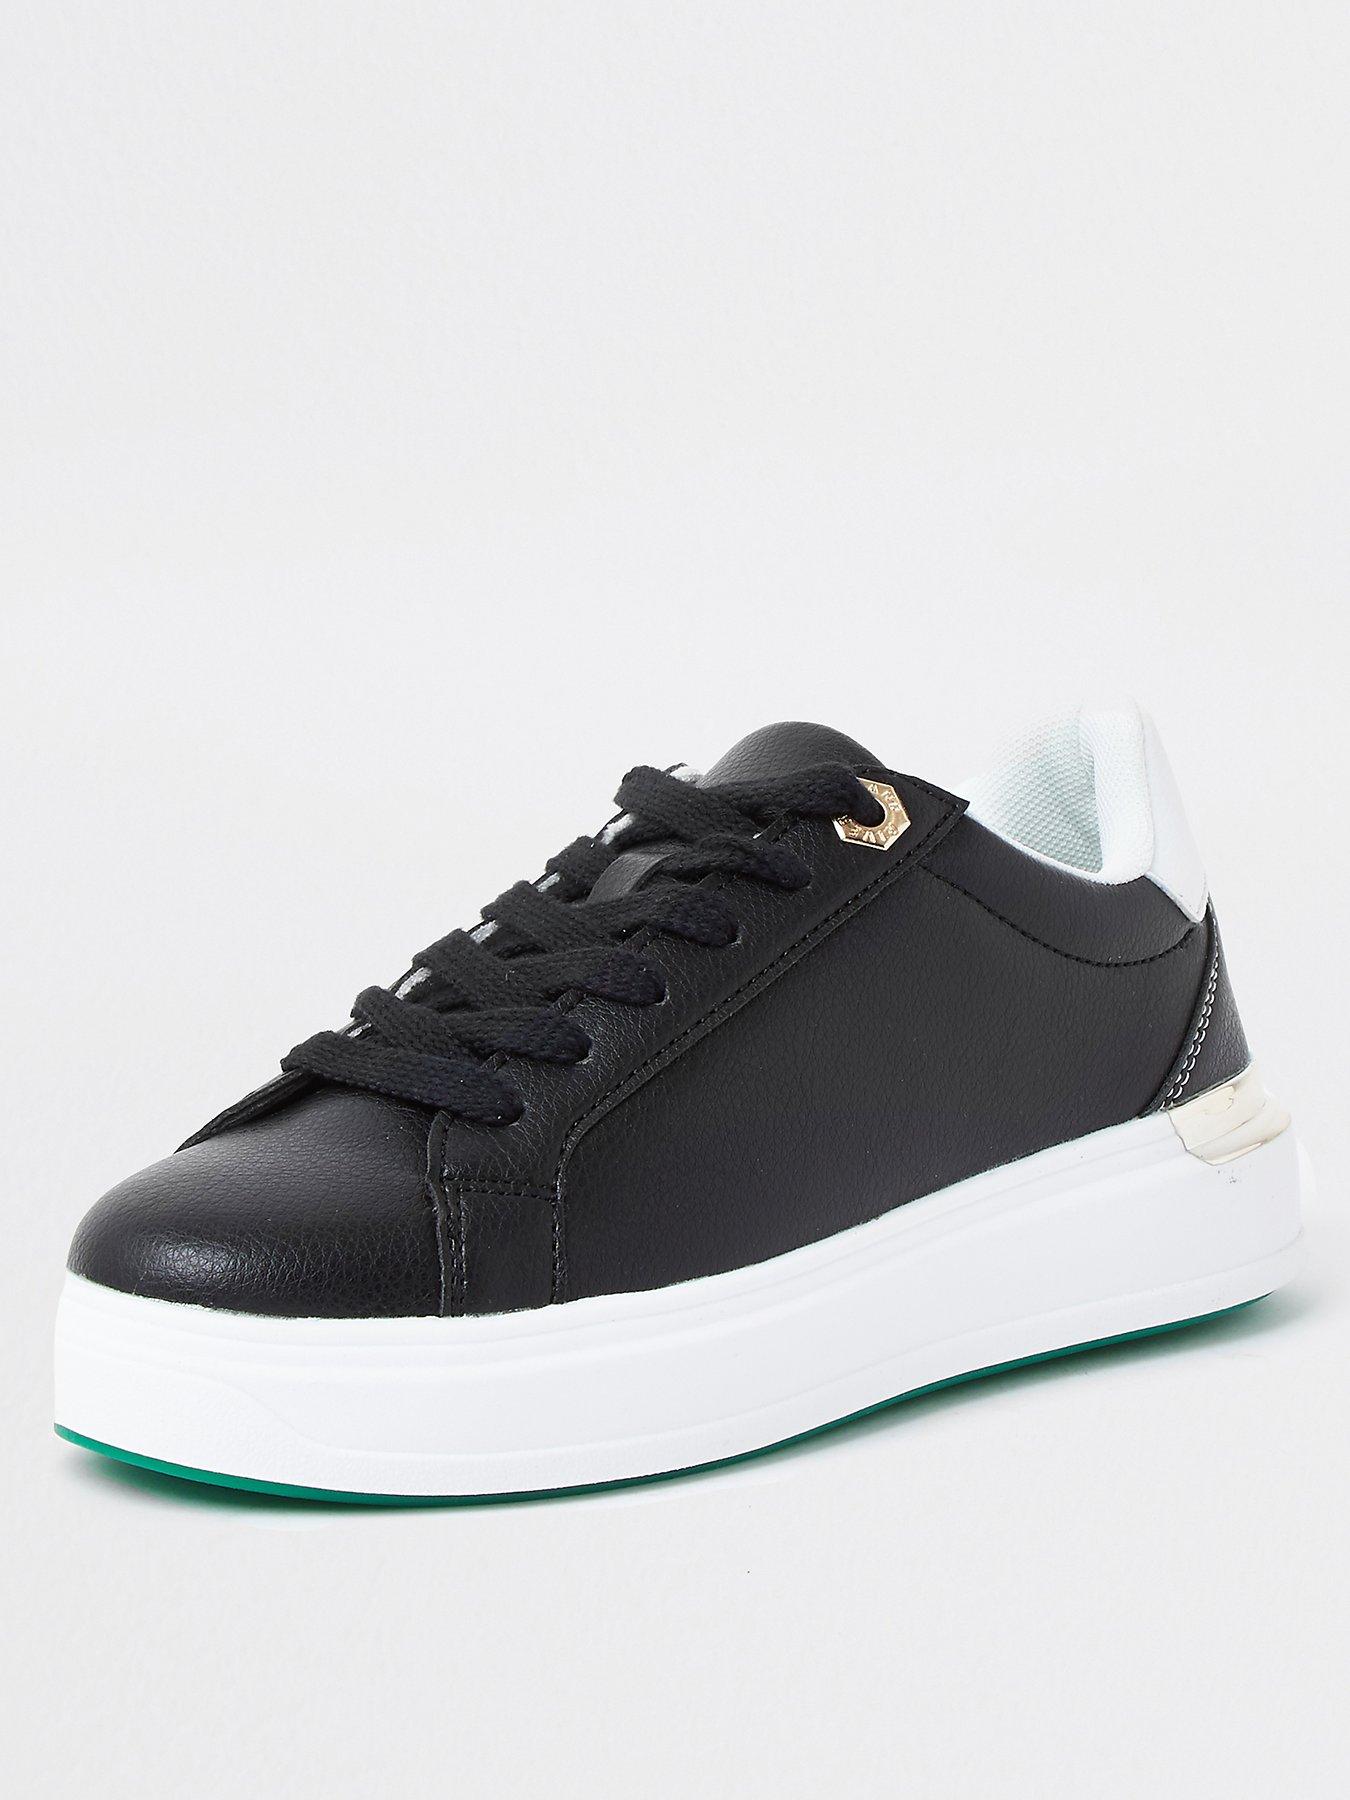 river island wasp trainers